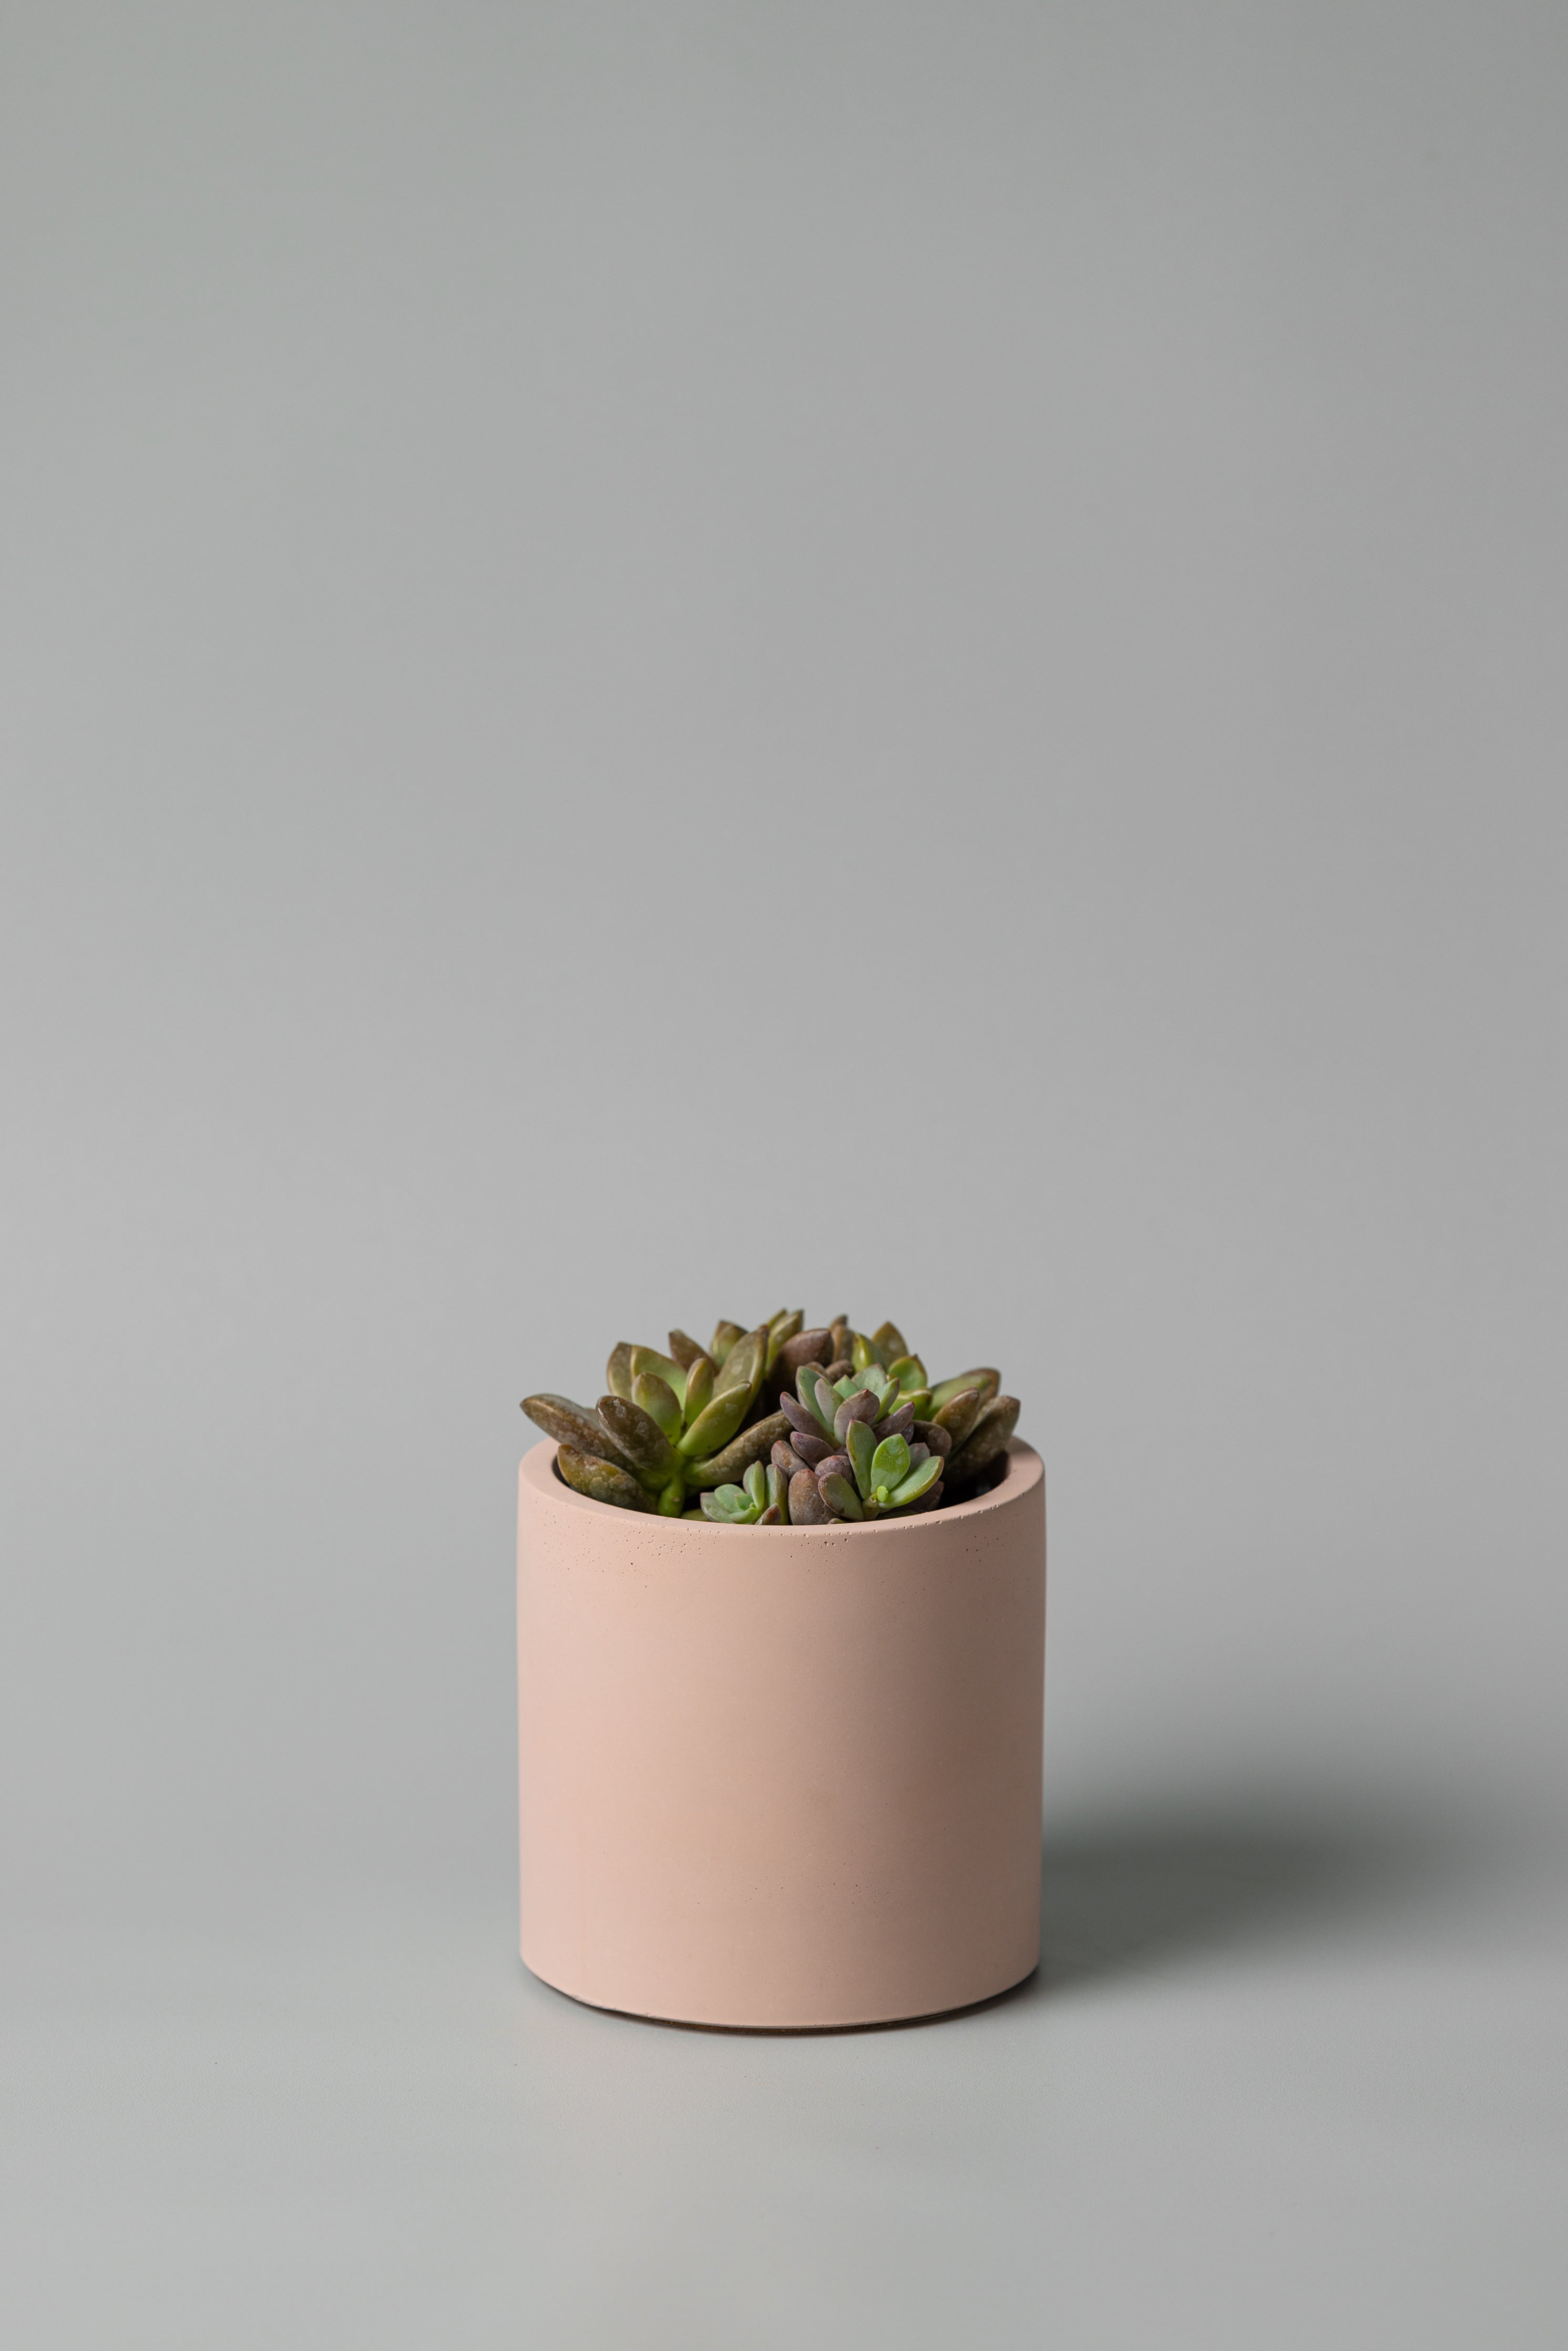 4" concrete cylinder planter in pink